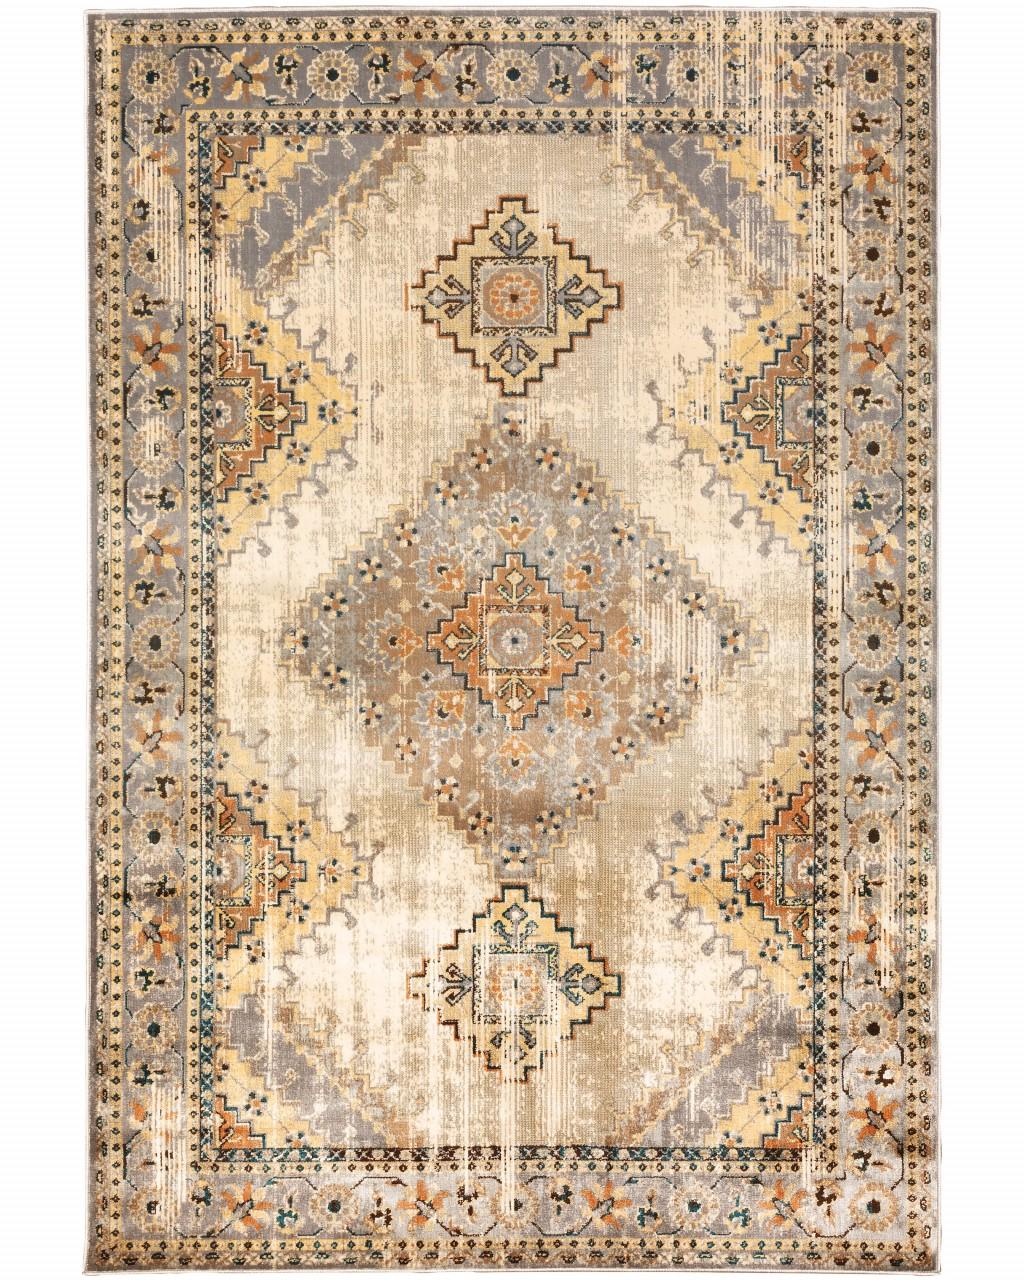 10’ x 13’ Gray and Beige Aztec Pattern Area Rug Default Title